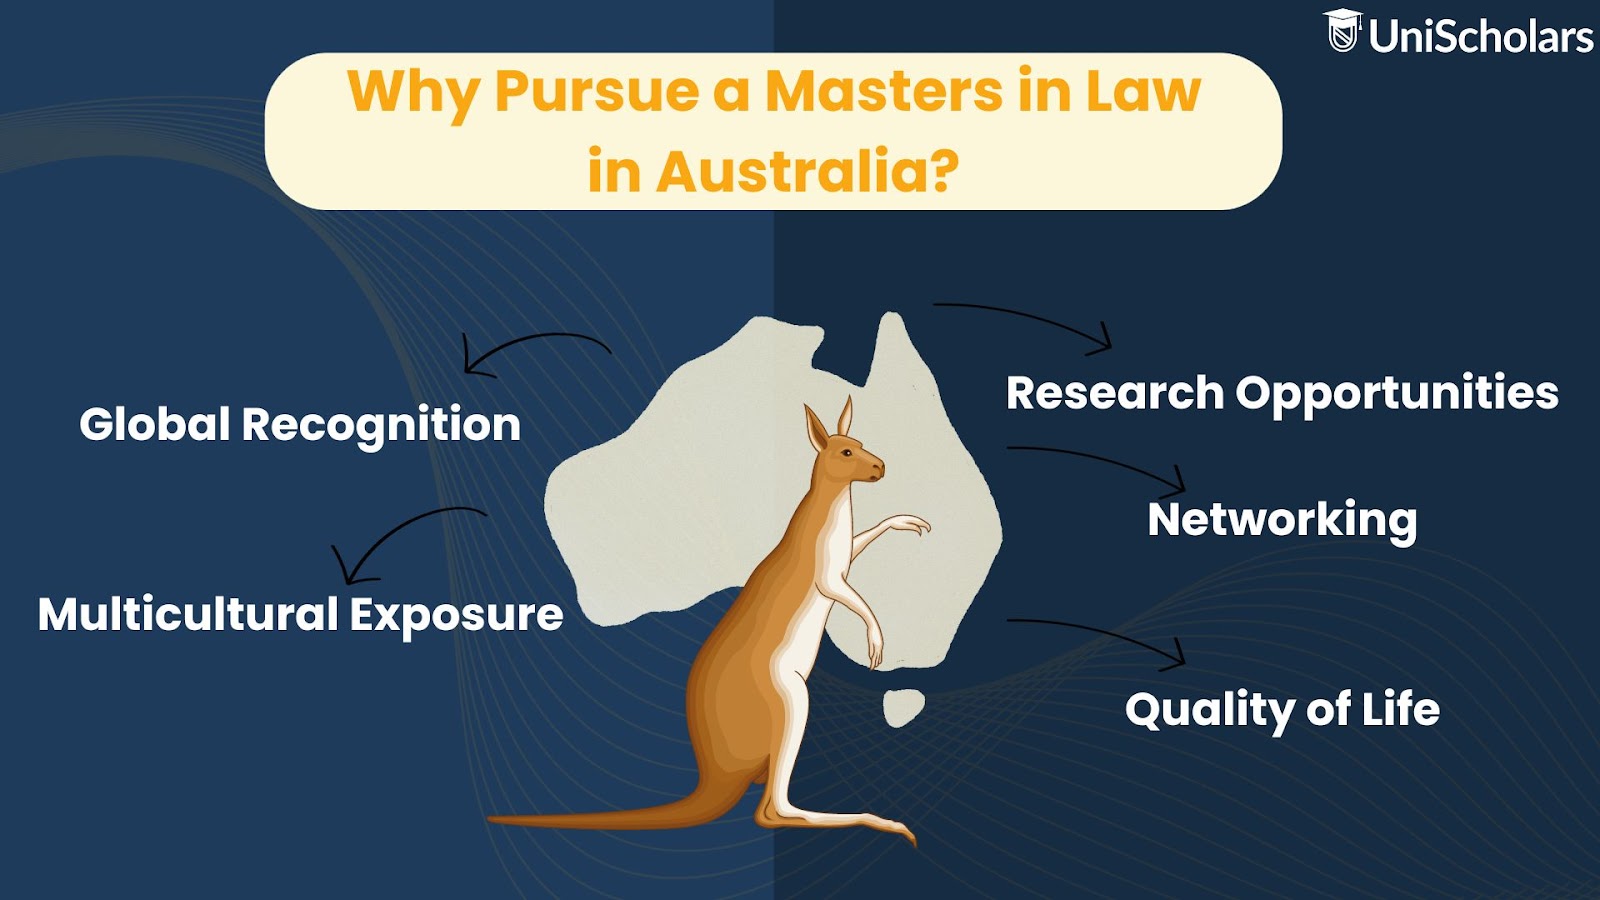 Why Pursue a Masters in Law in Australia